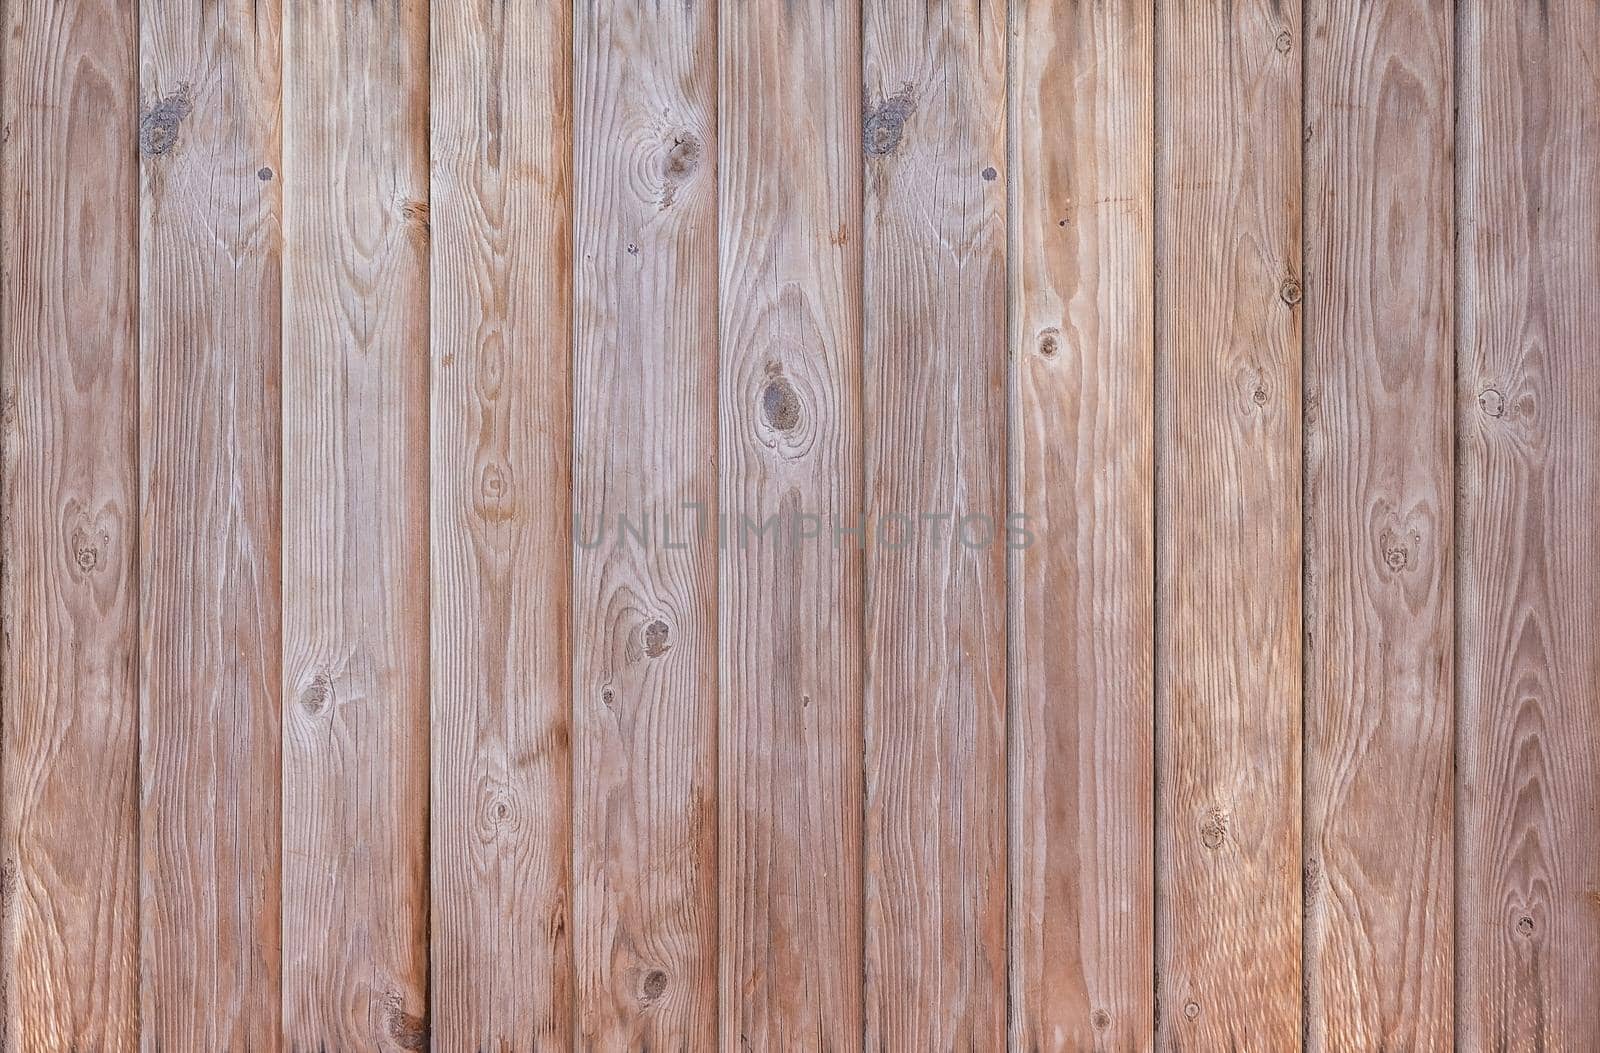 Wall of old wooden plank boards. Material texture surface.